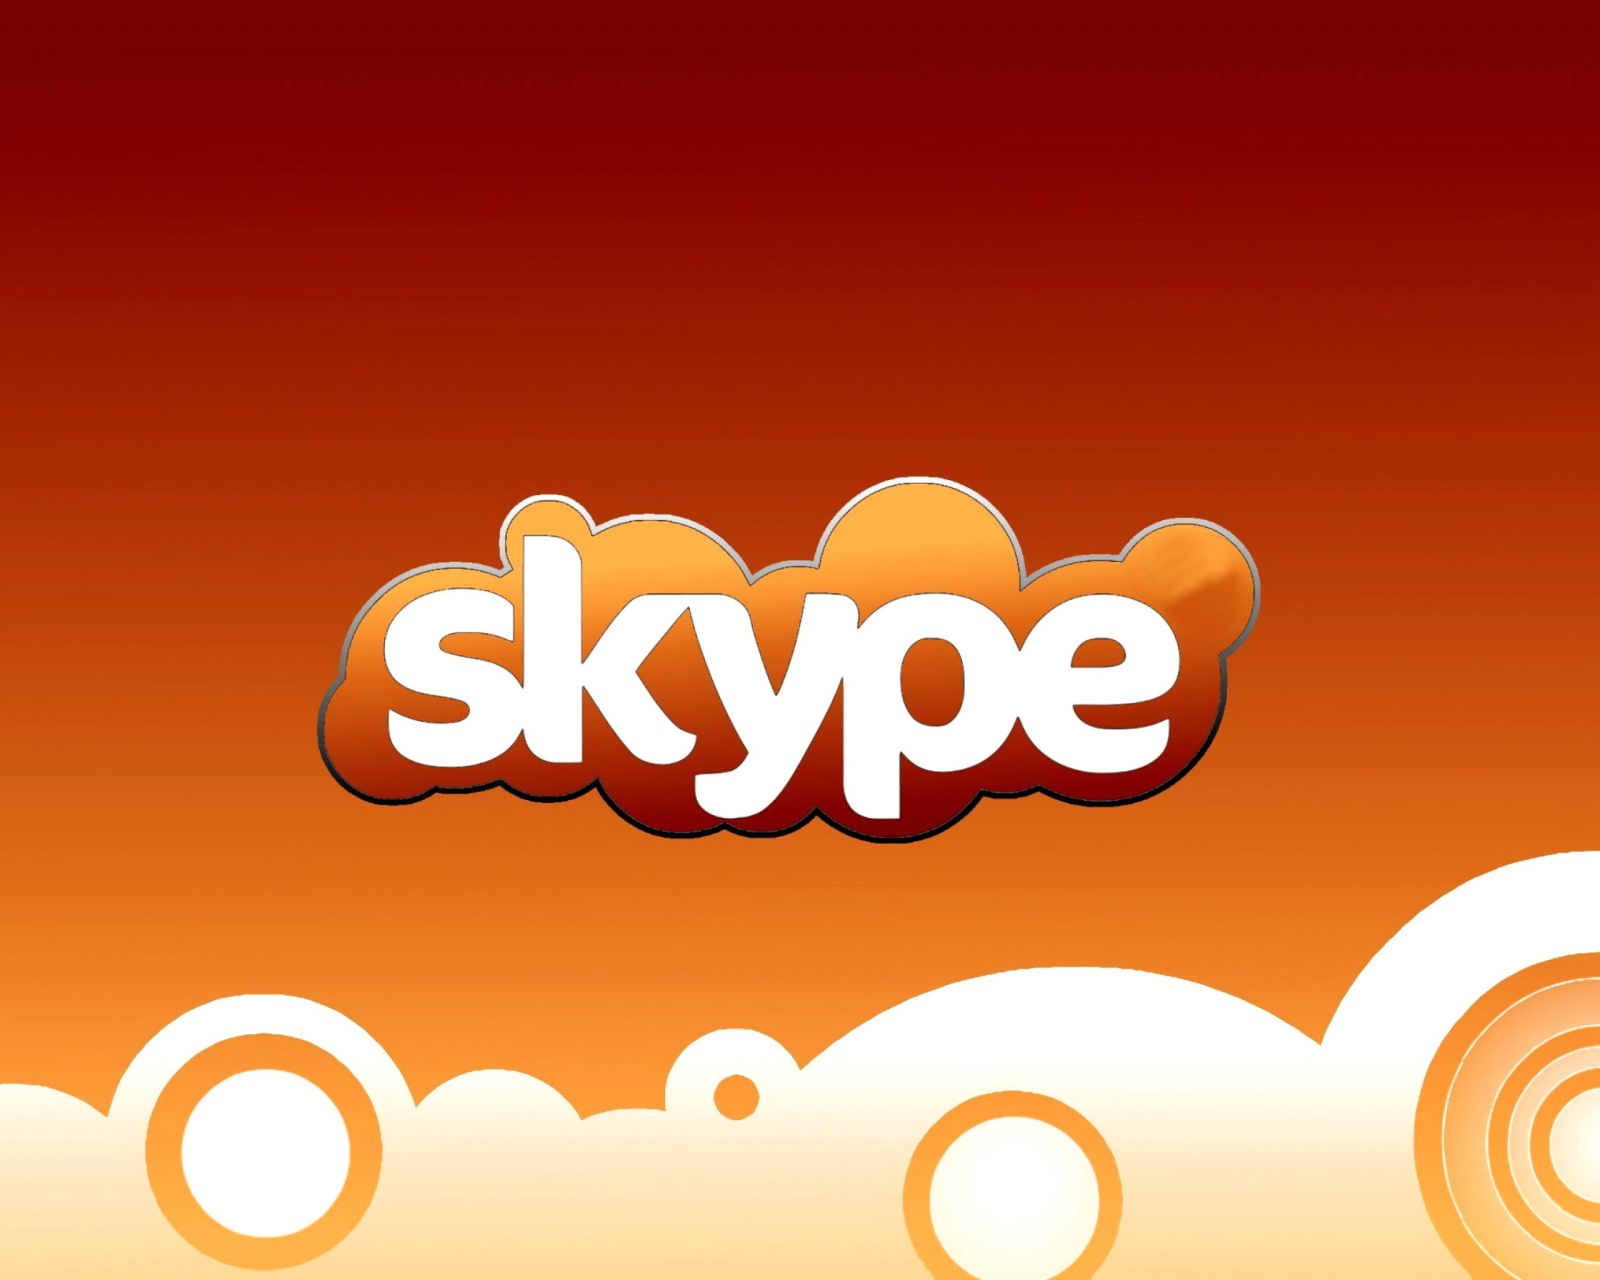 Sfondi Skype for calls and chat 1600x1280